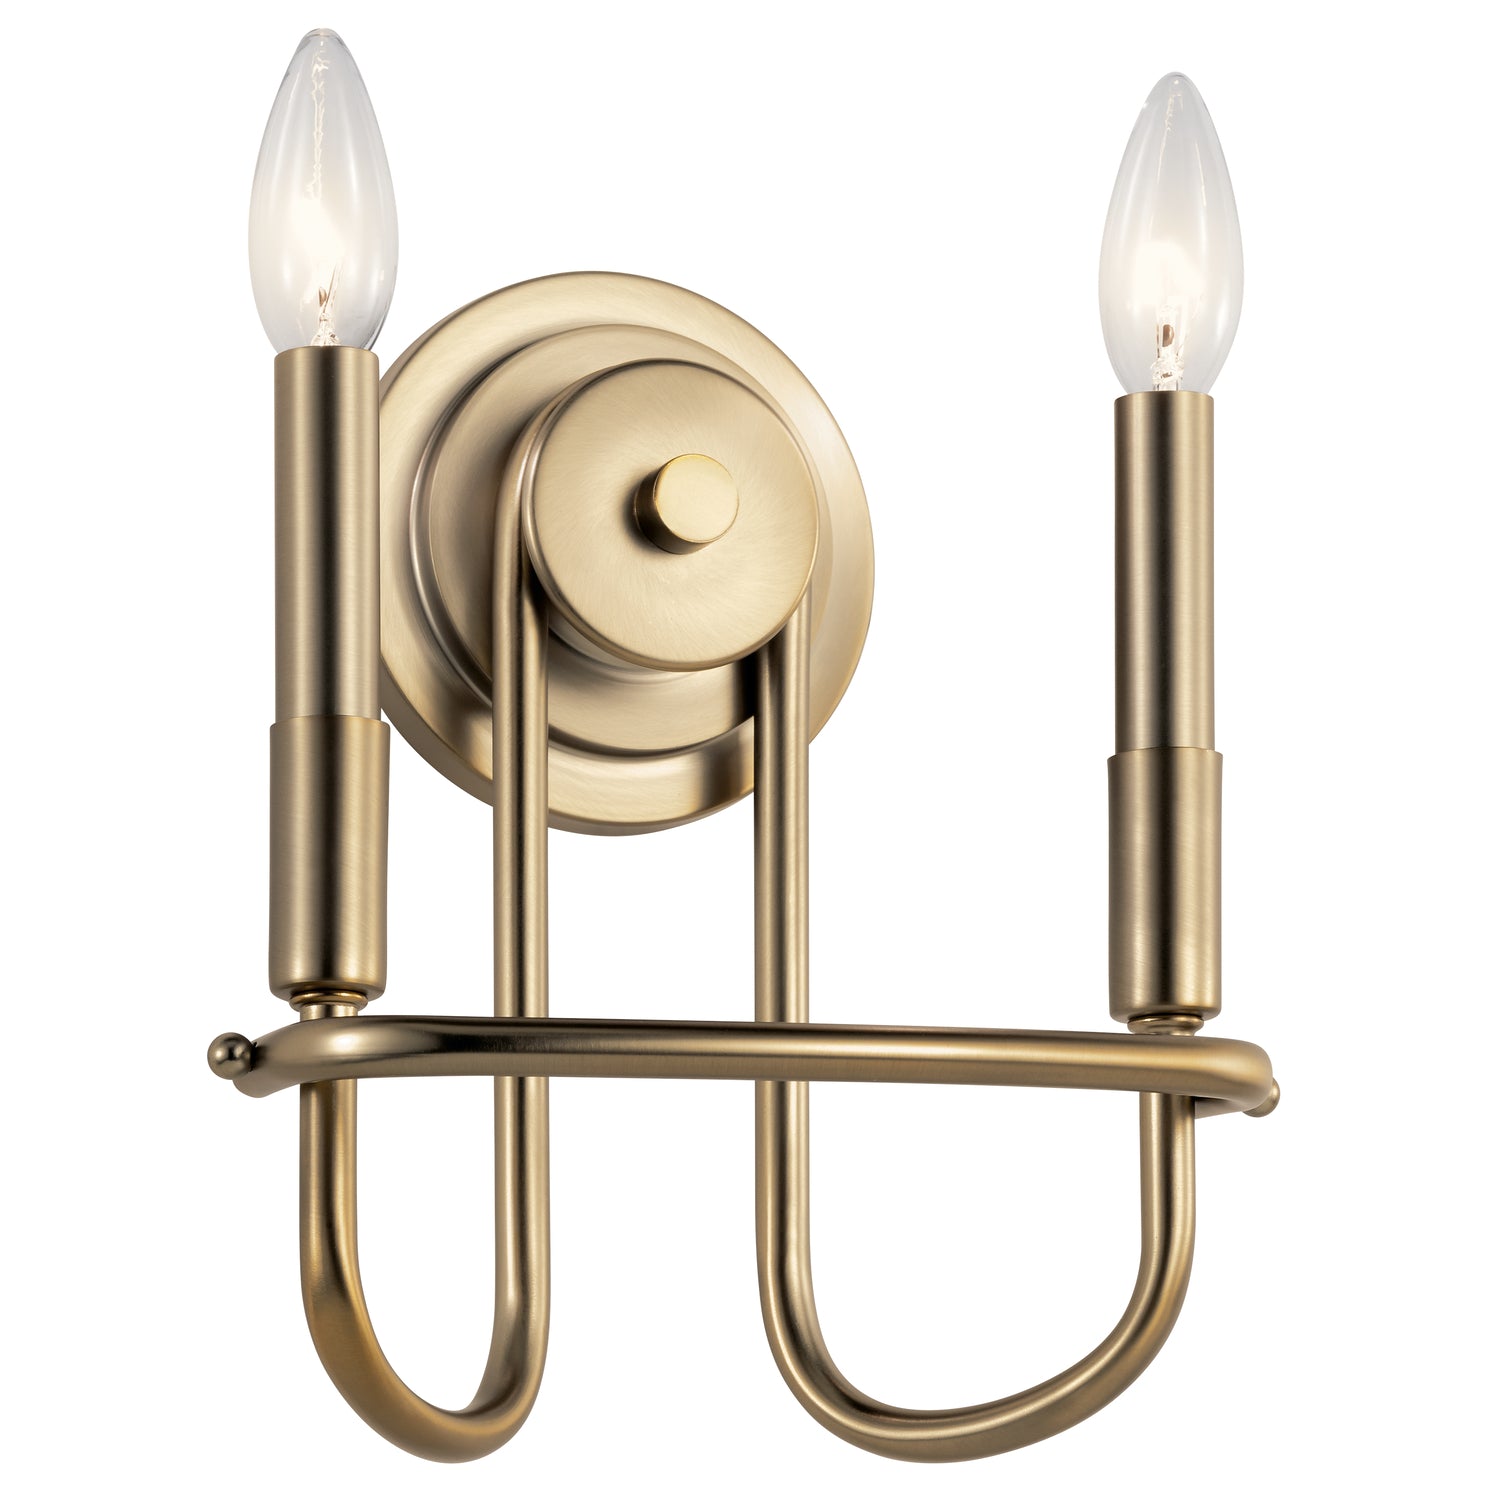 Capitol Hill Sconce Classic Bronze